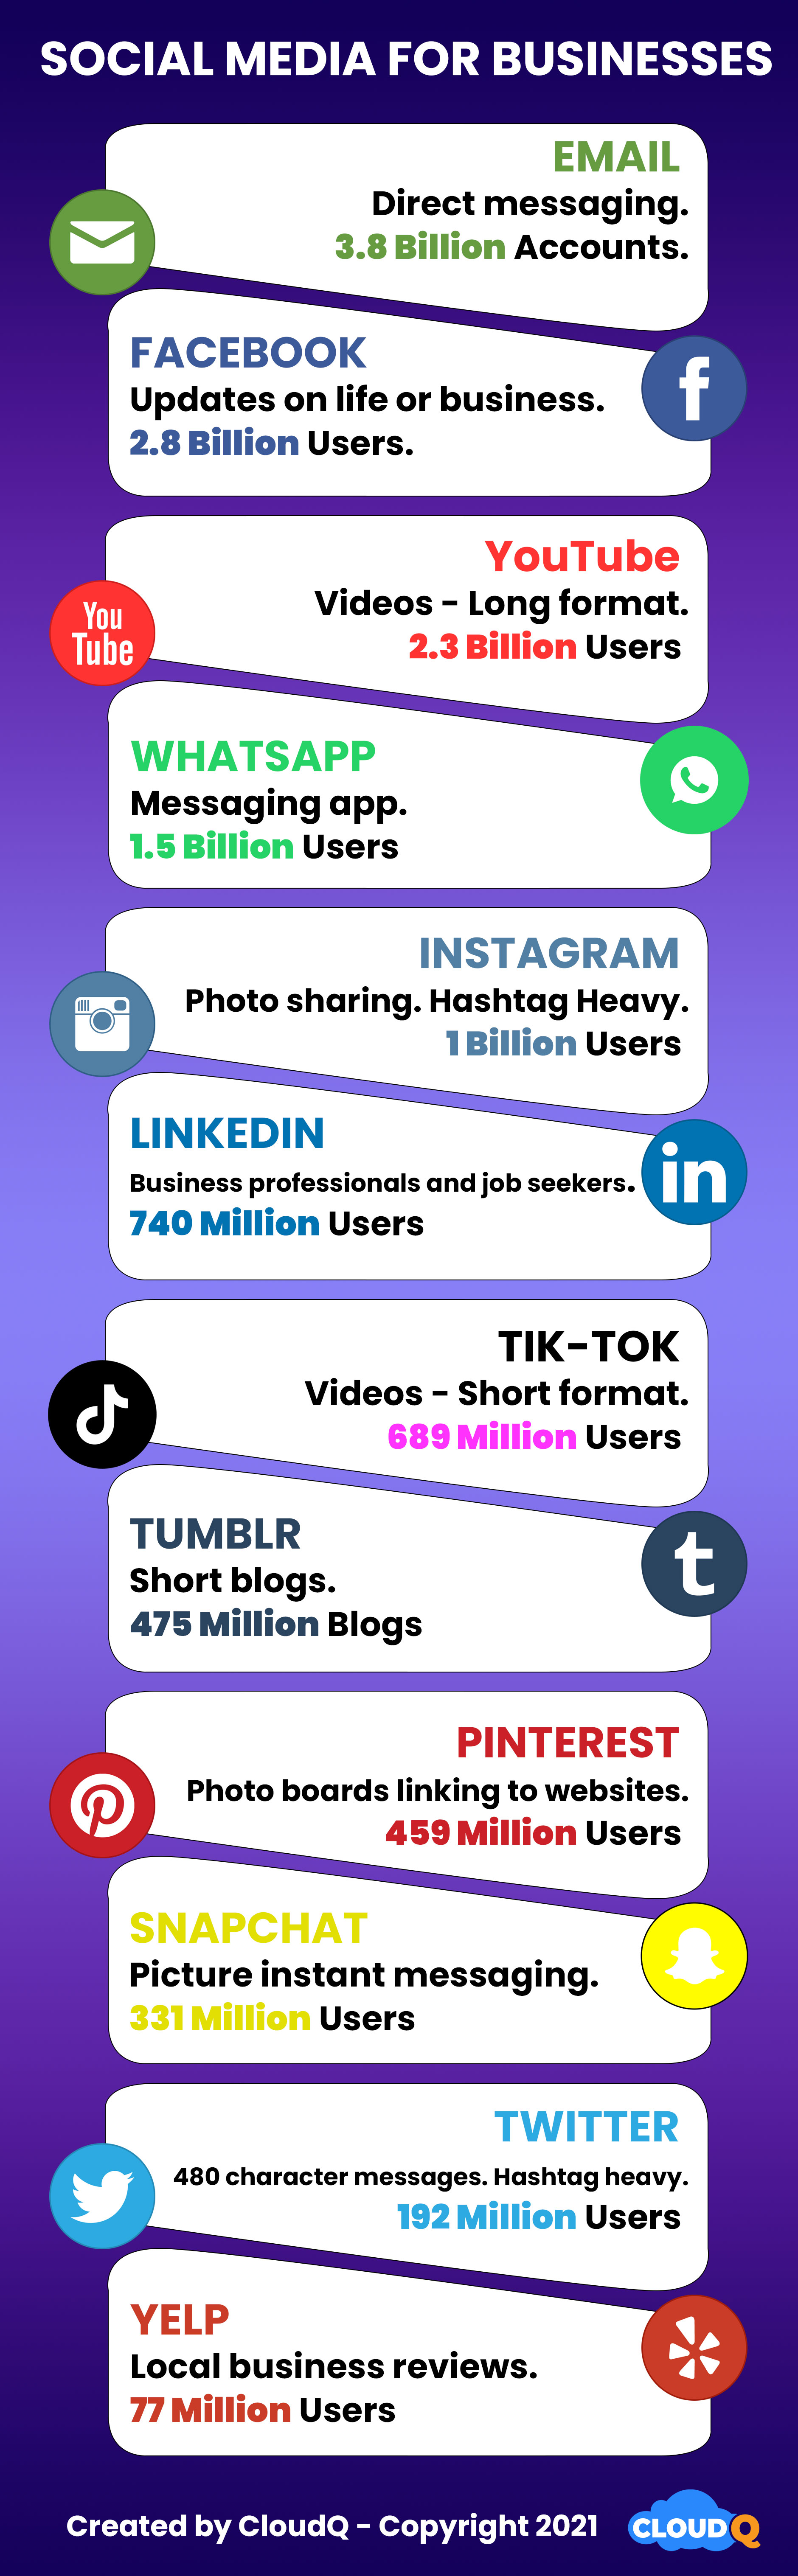 social media infographic user numbers info